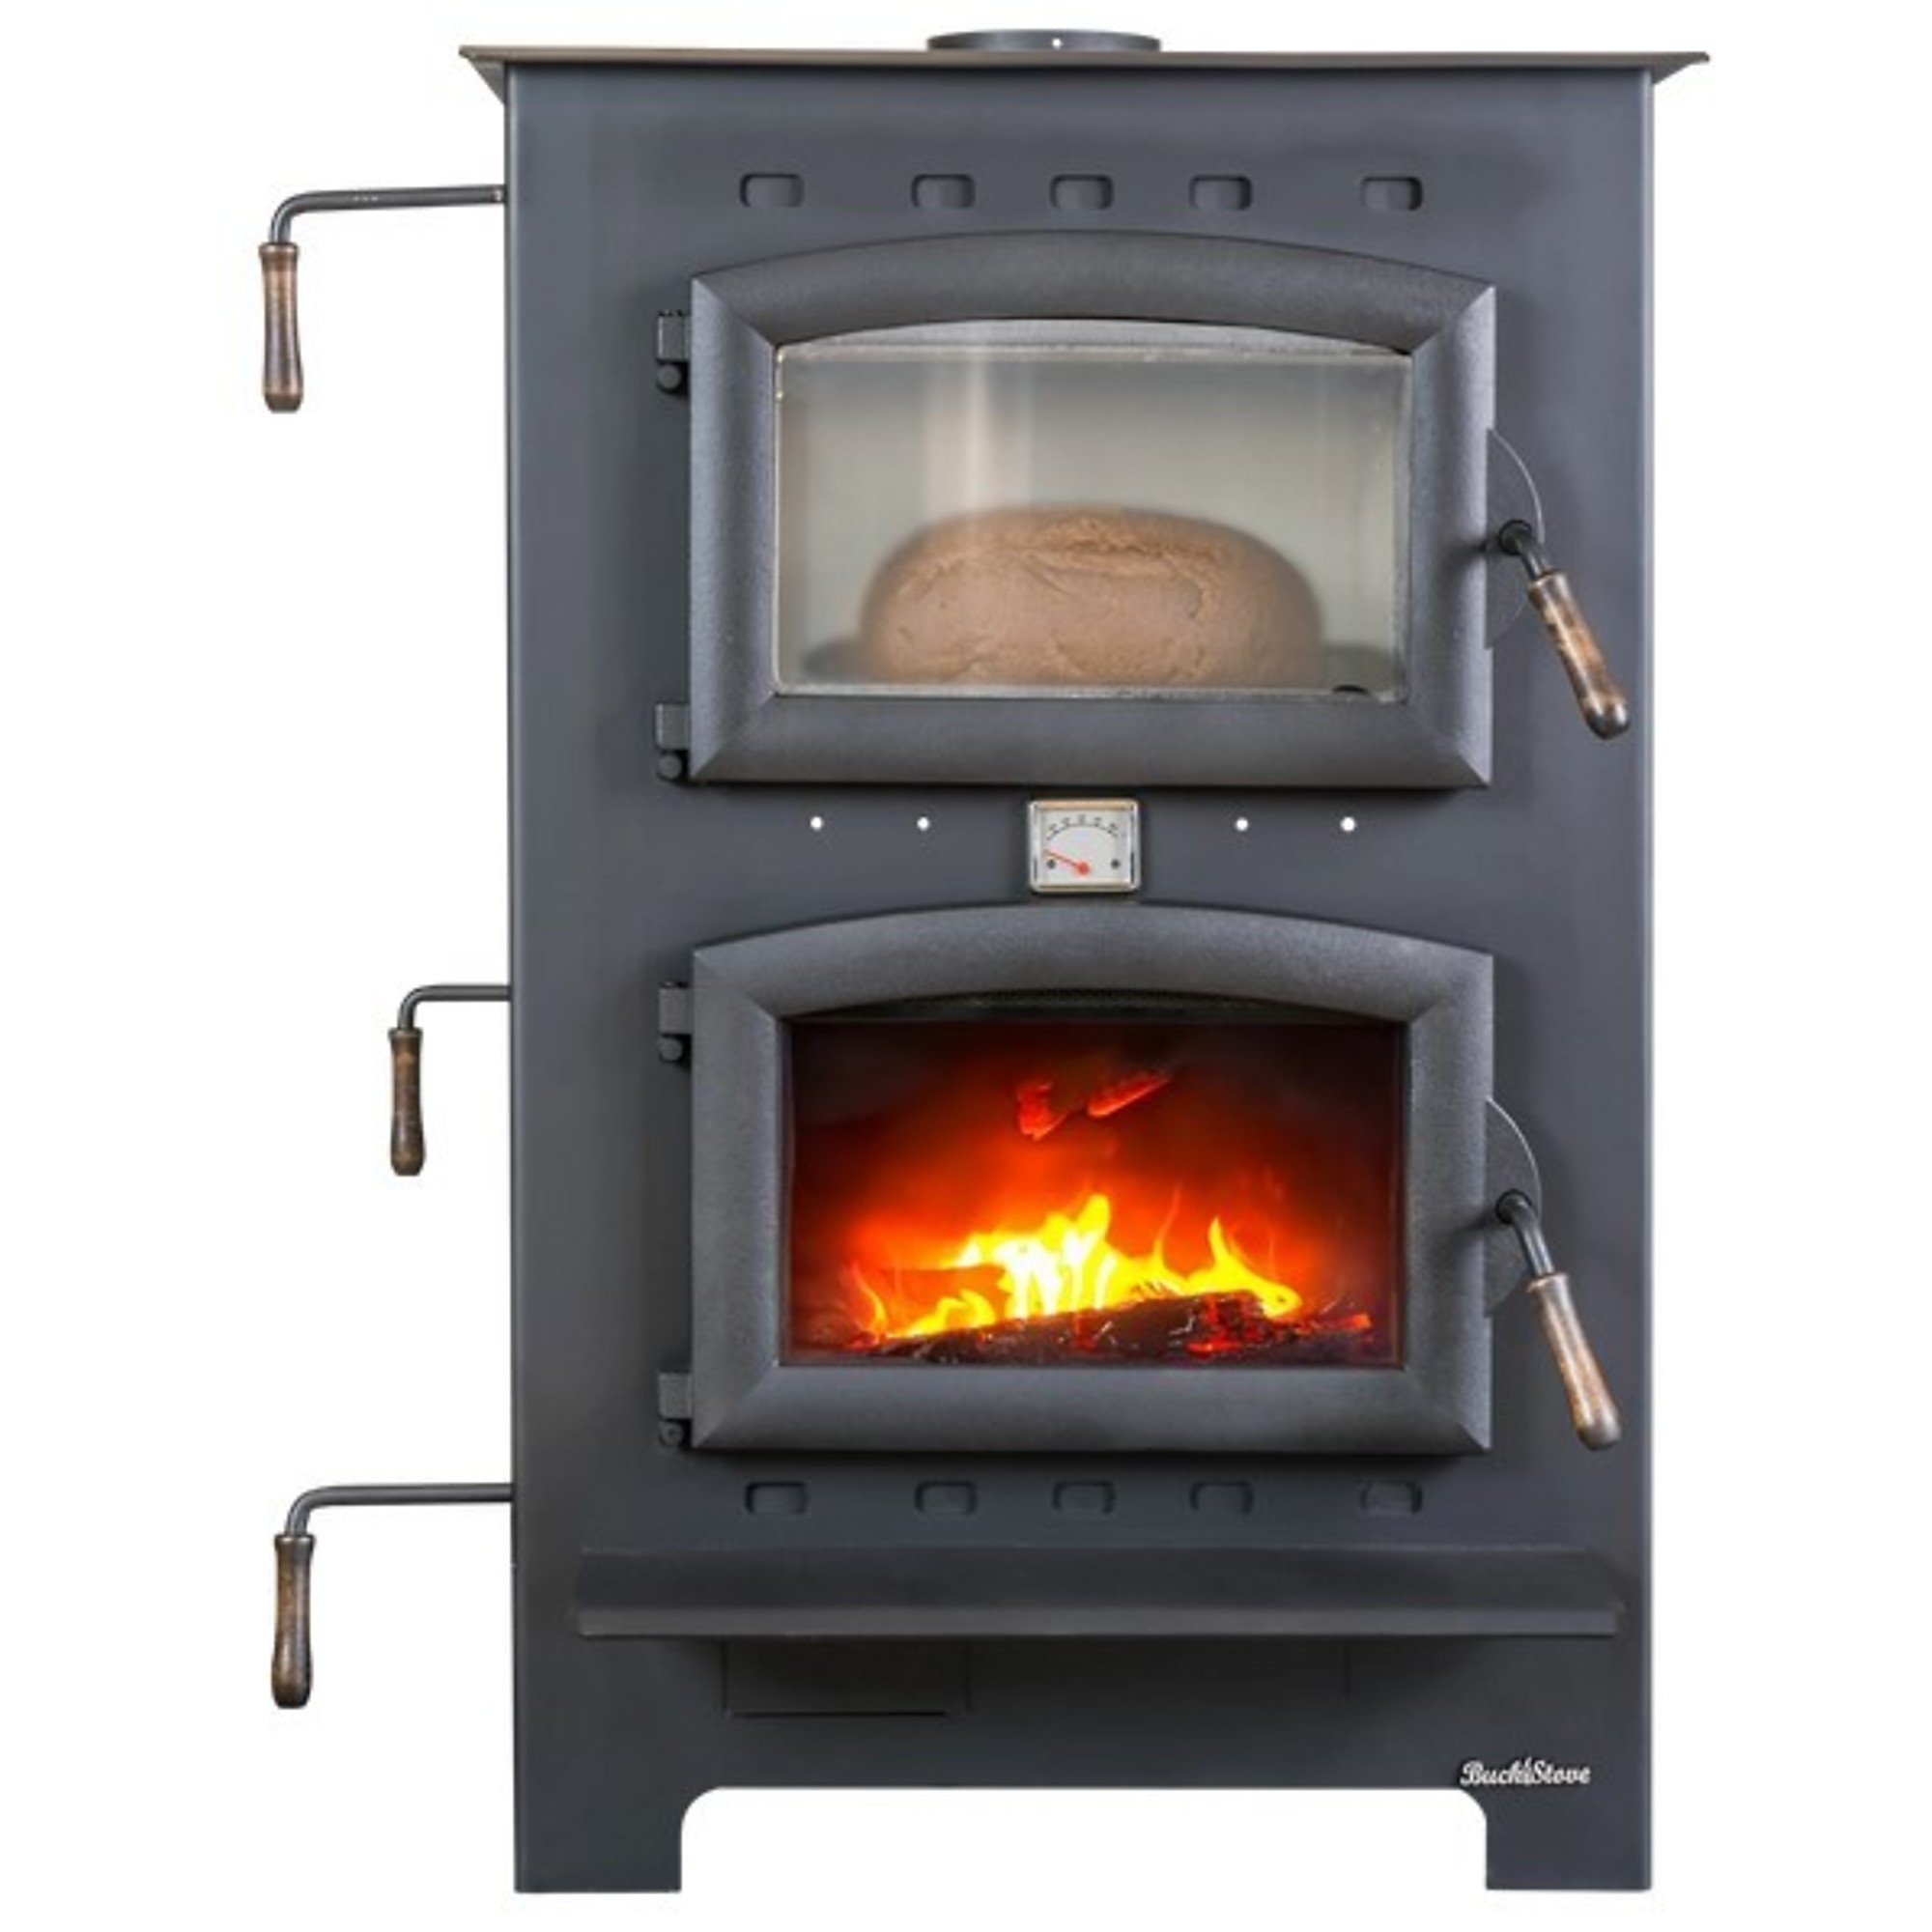 Buck, Wood Burning Cookstove with Oven, Heat Output 28901 Btu/hour, Heating Capability 1800 ftÂ², Model FP Homesteader